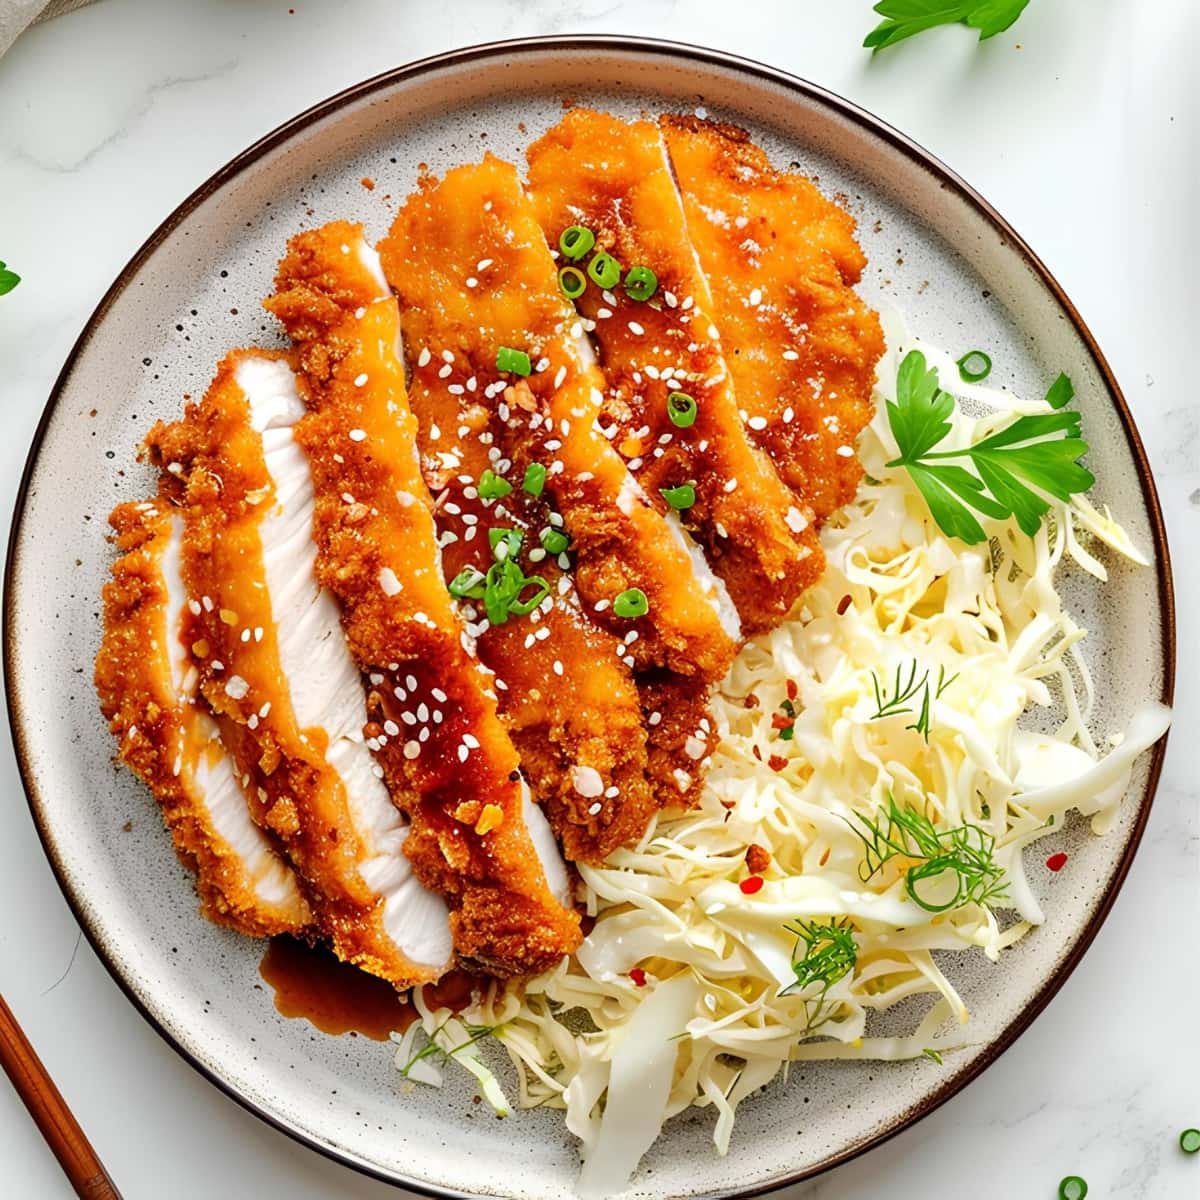 Crispy chicken katsu with cabbage salad on a plate, overhead view